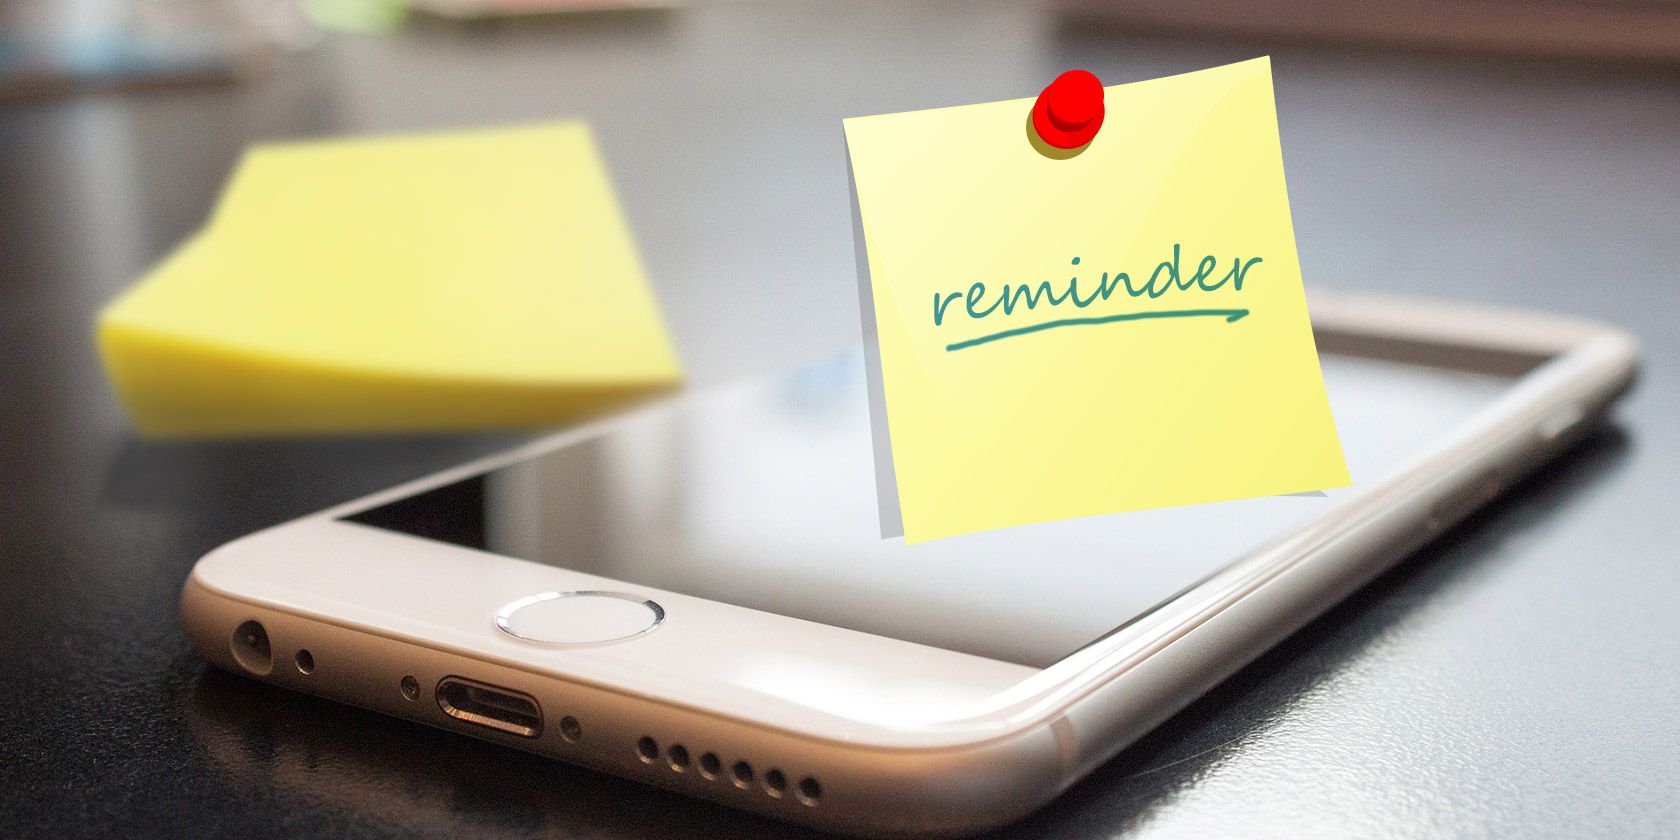 Put iPhone Reminders To Better Use With The Right Apps & Tips